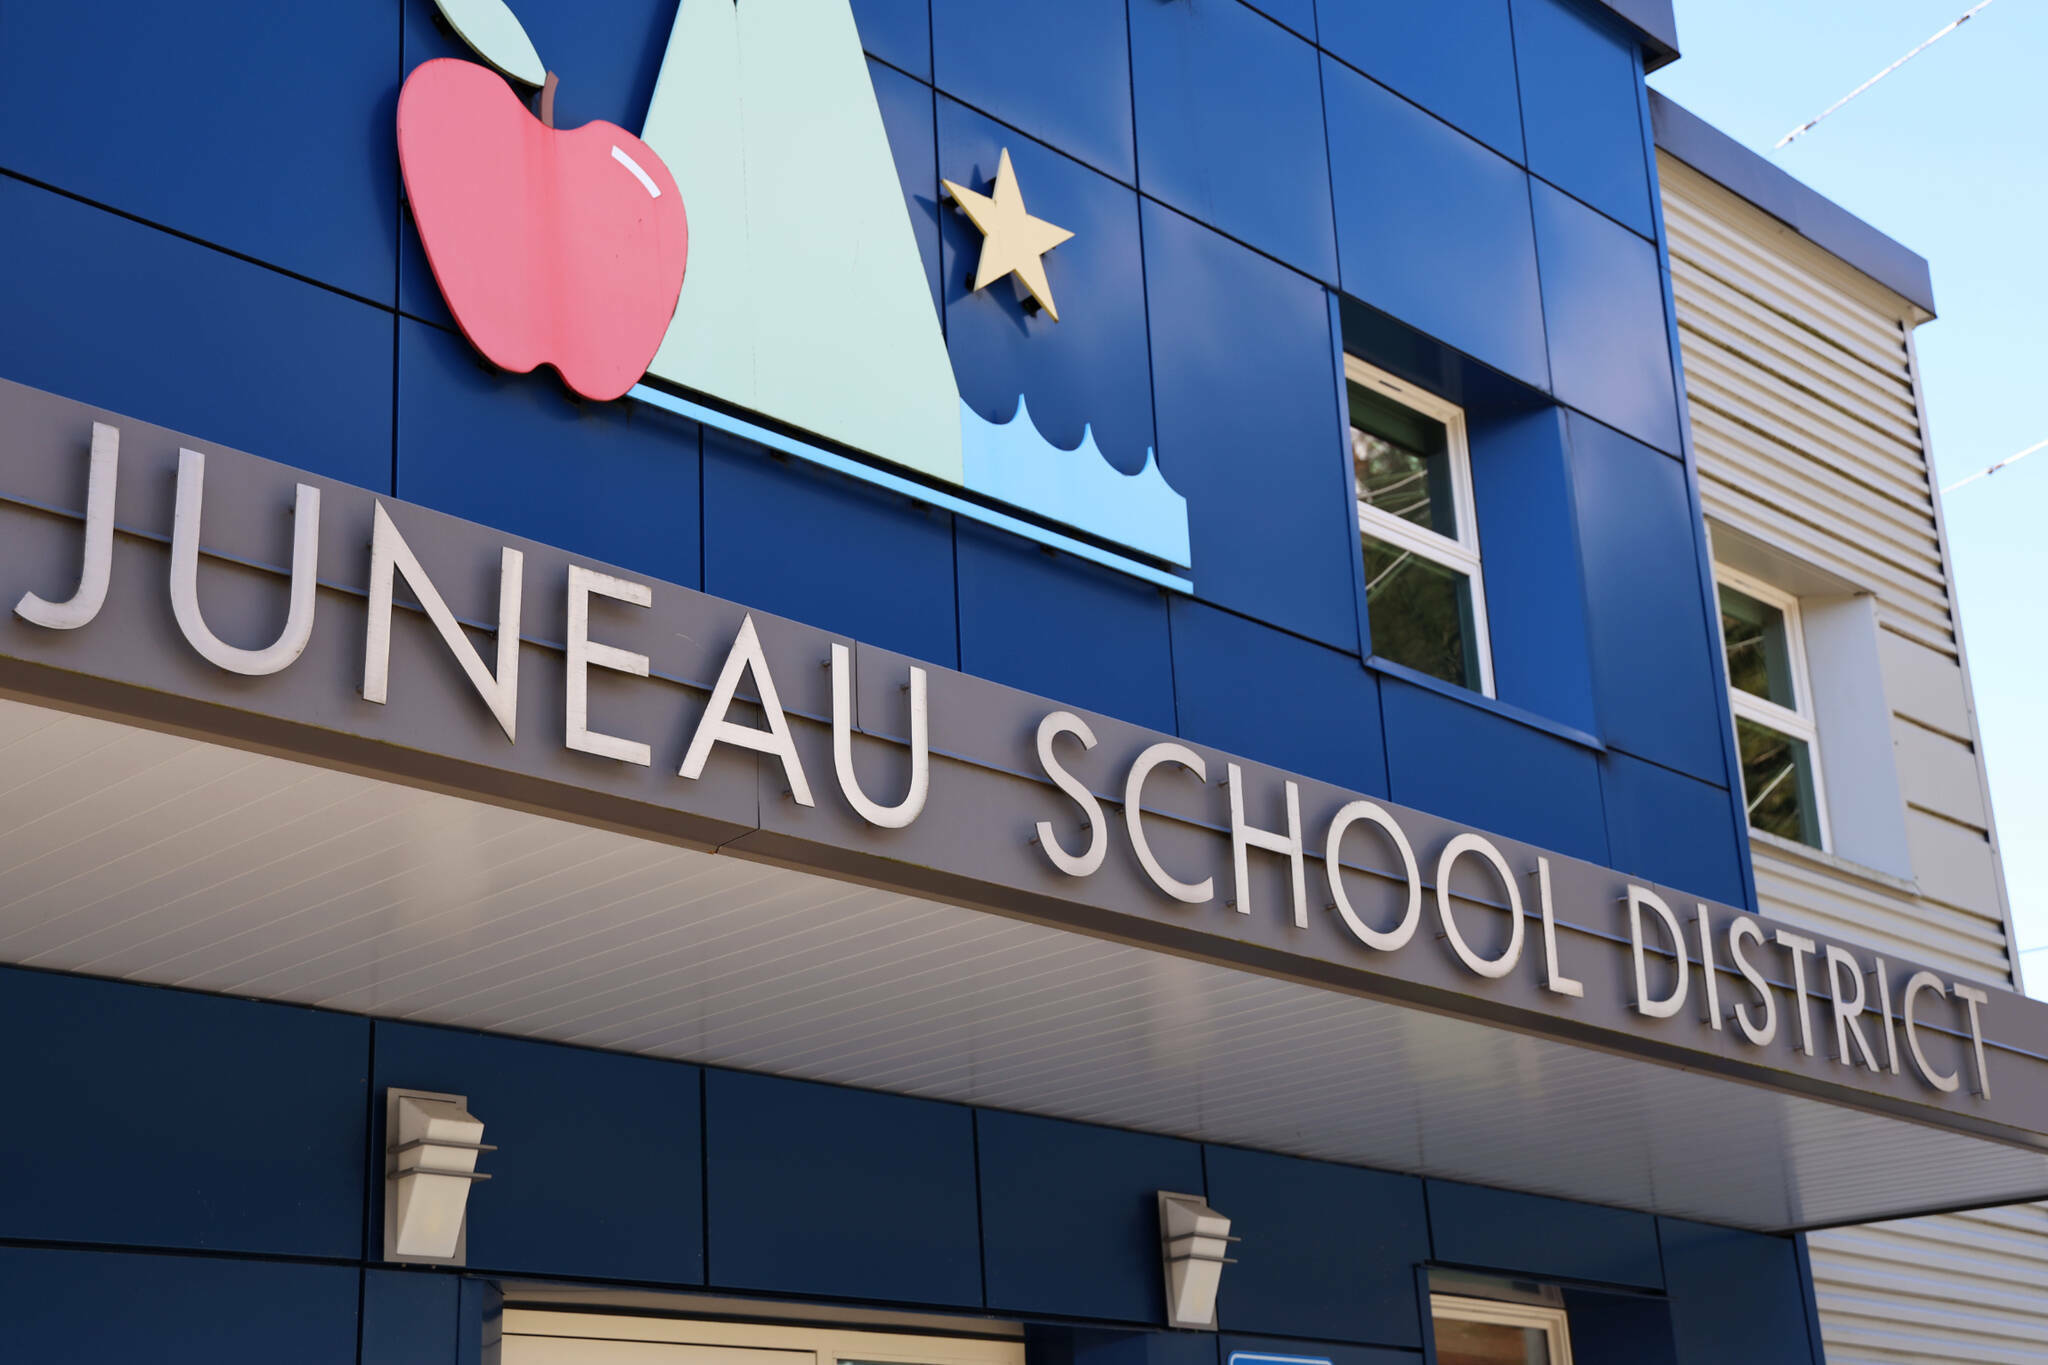 Students in the Juneau School District fared better on standardized science tests during the past year than their peers statewide, but the local proficiency score of about 43% was nearly 6% lower than the local scores last year, according to results released last Friday. (Clarise Larson / Juneau Empire File)